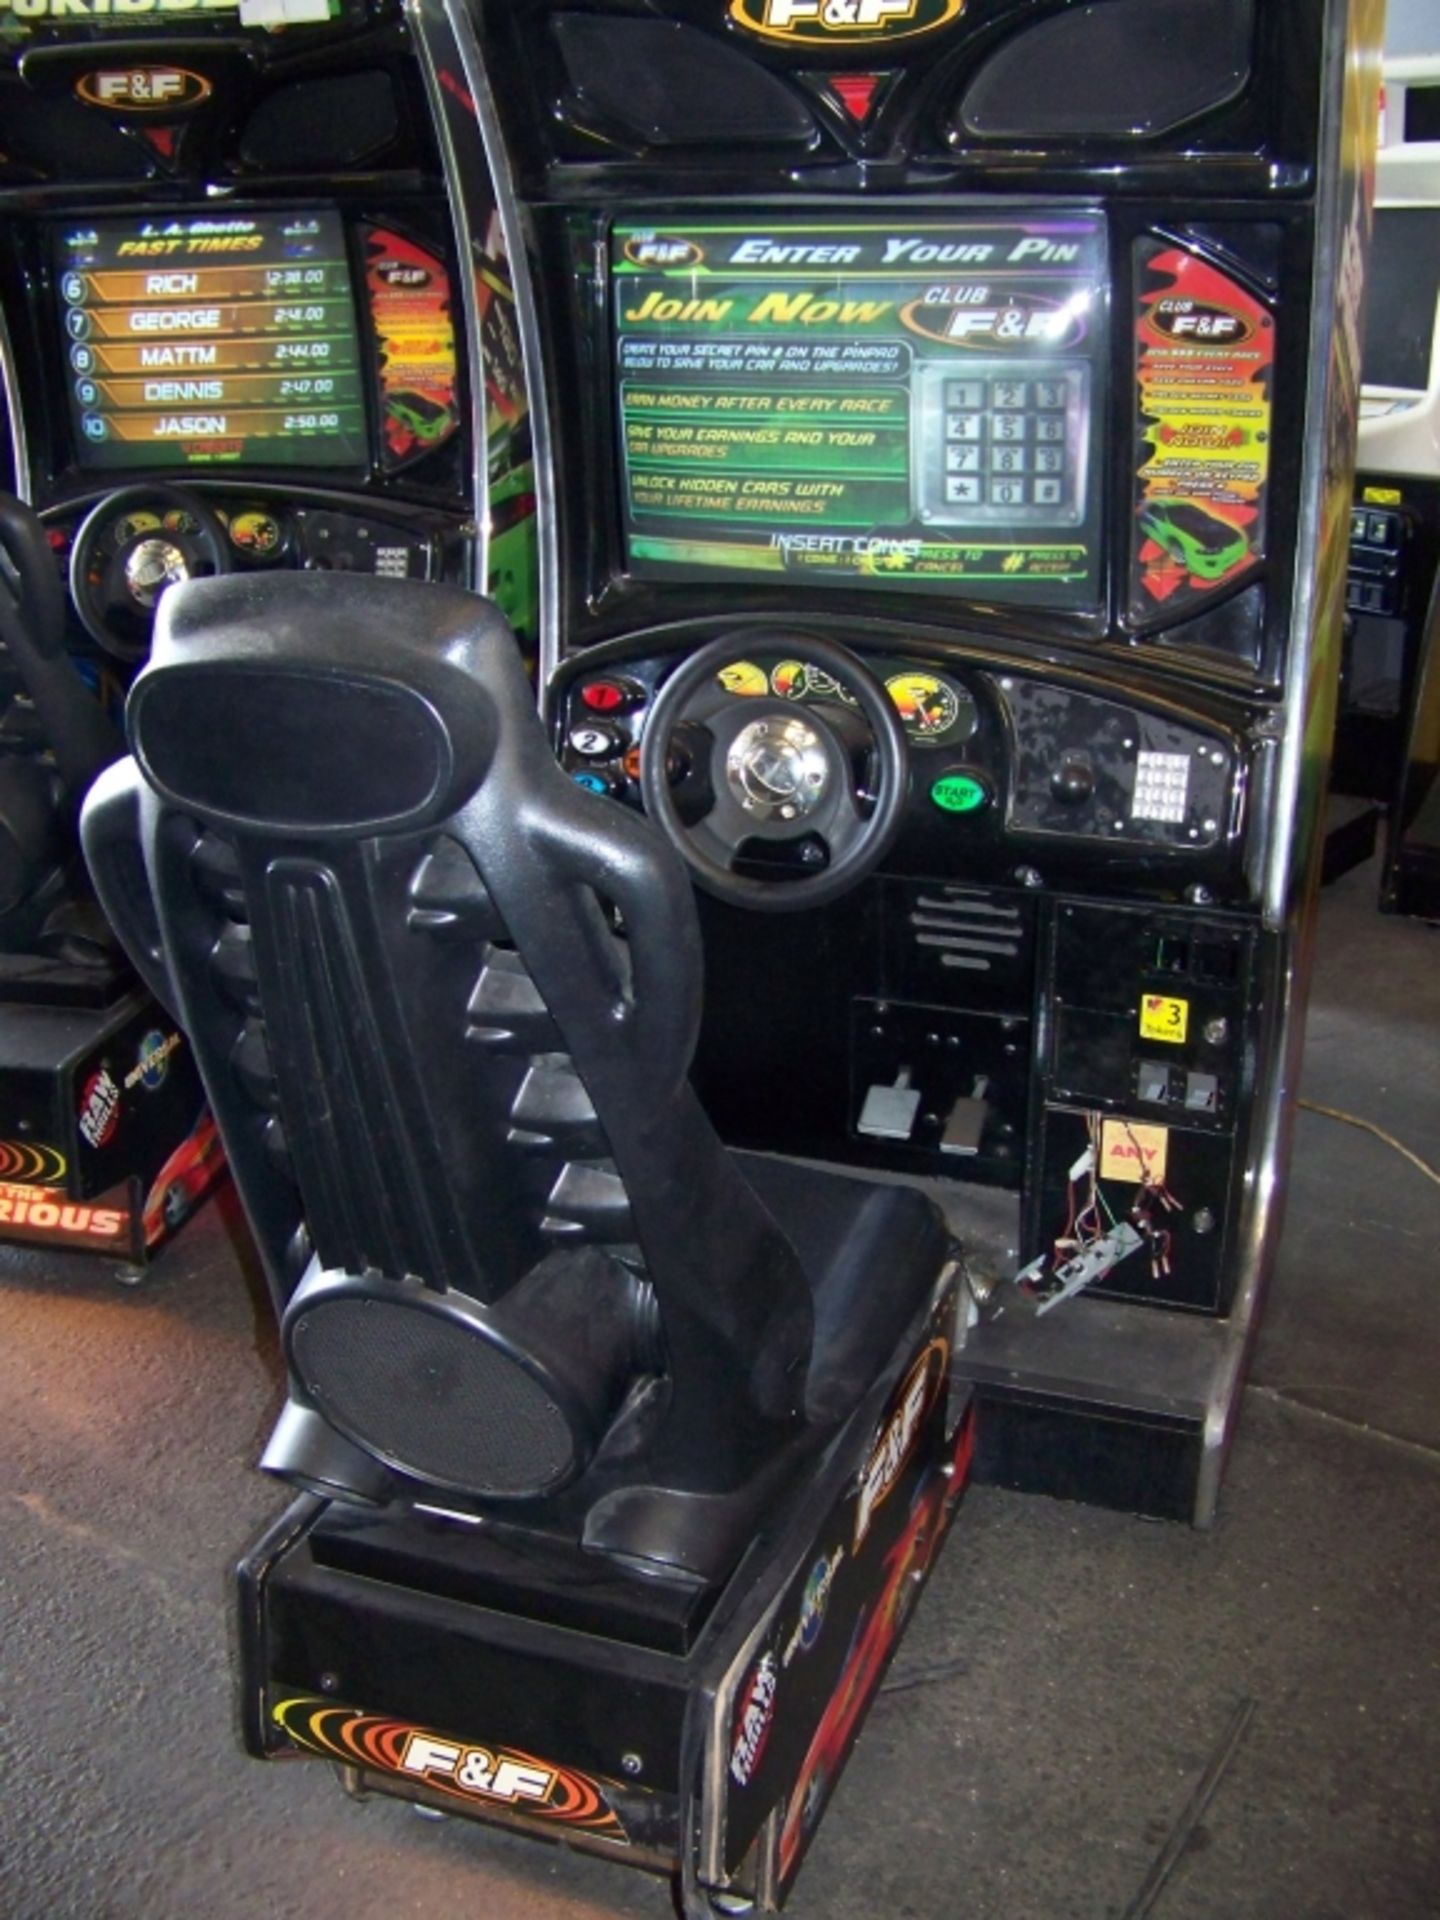 THE FAST AND FURIOUS RACING ARCADE GAME SE - Image 3 of 5